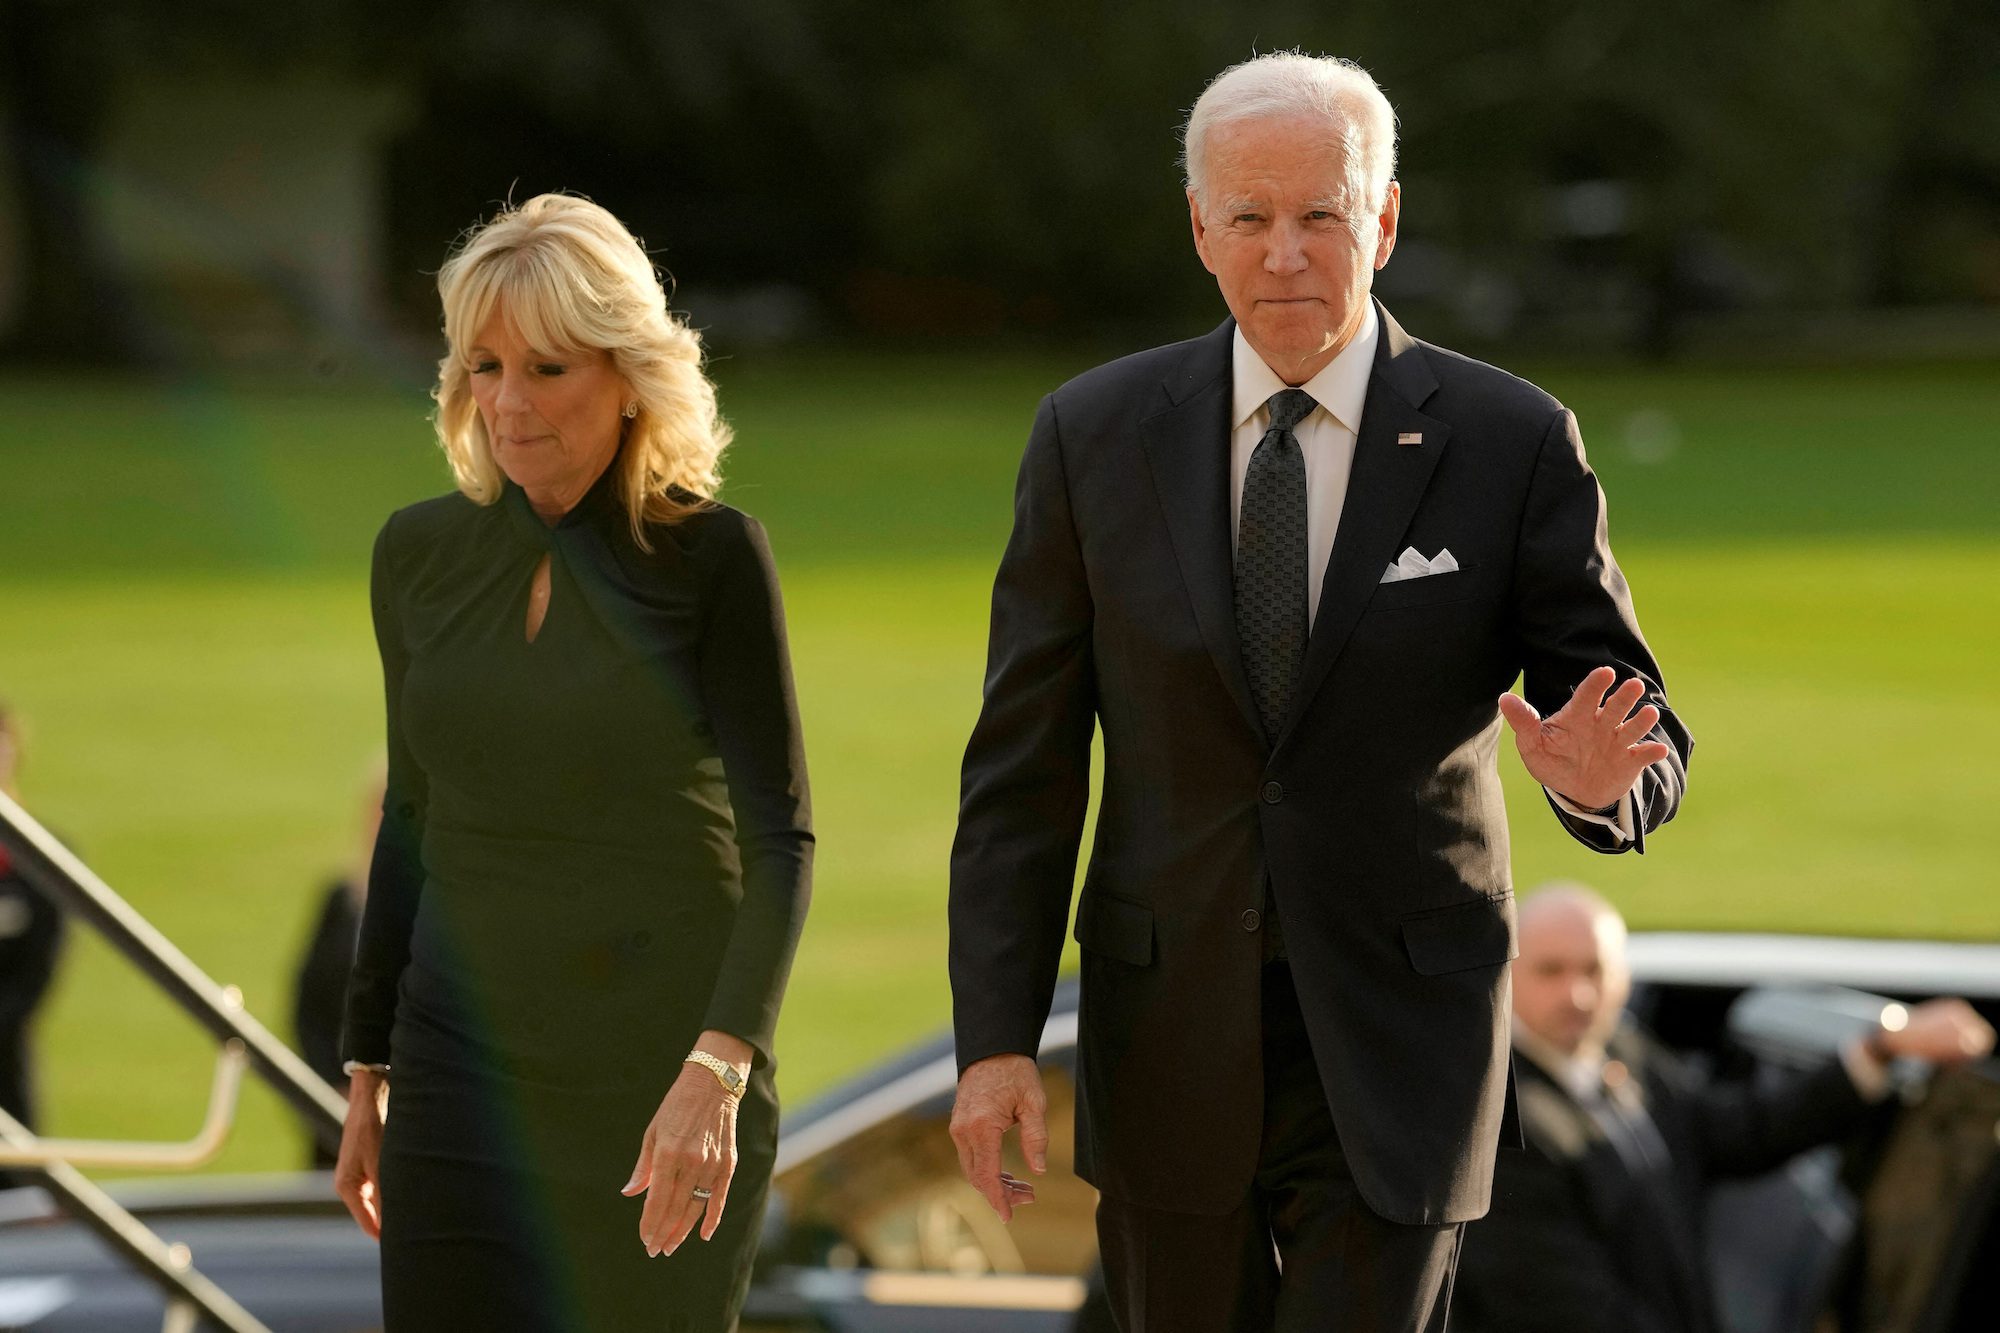 US President Joe Biden accompanied by the First Lady Jill Biden arrive at Buckingham Palace in London, Sunday, Sept. 18, 2022. King Charles III is holding a reception at Buckingham Palace for heads of state and other leaders on Sunday evening ahead of the state funeral of Queen Elizabeth II on Monday.     Markus Schreiber/Pool via REUTERS